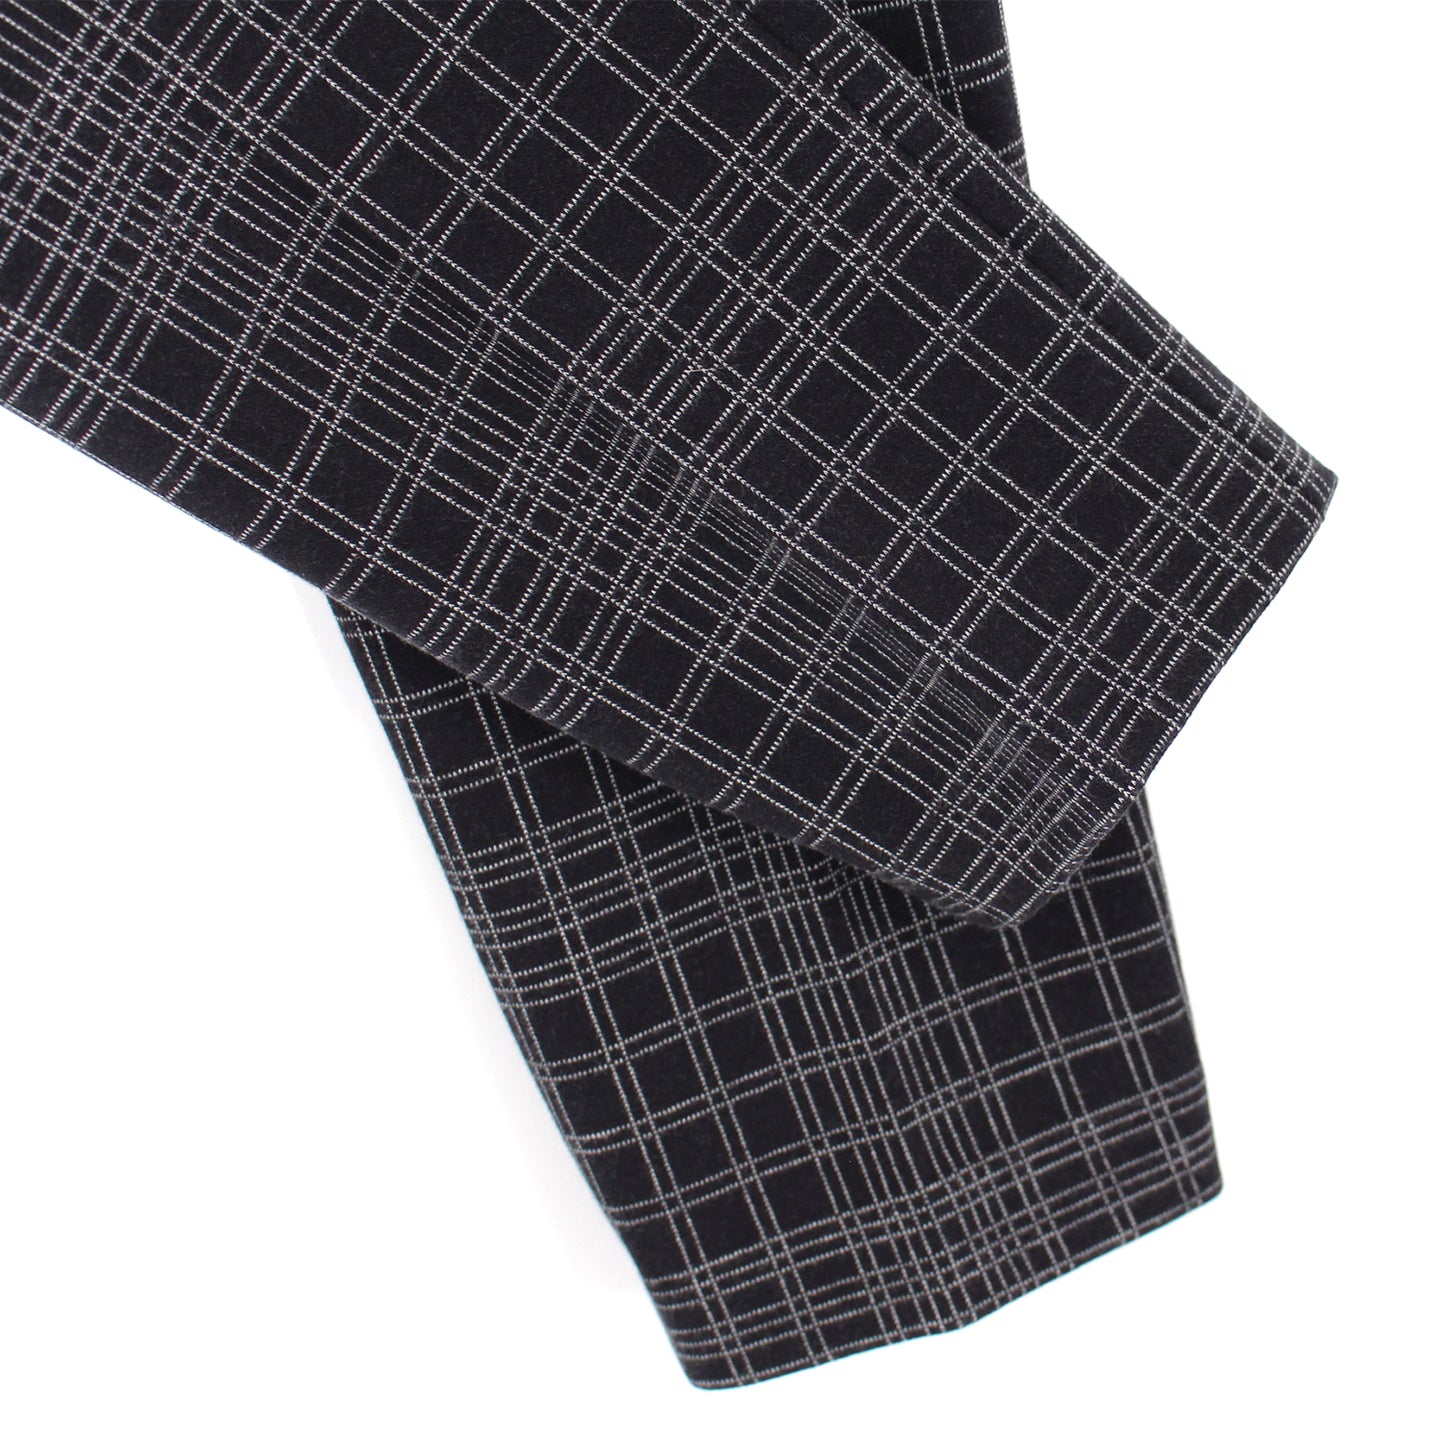 Thoery Testra Check Trousers